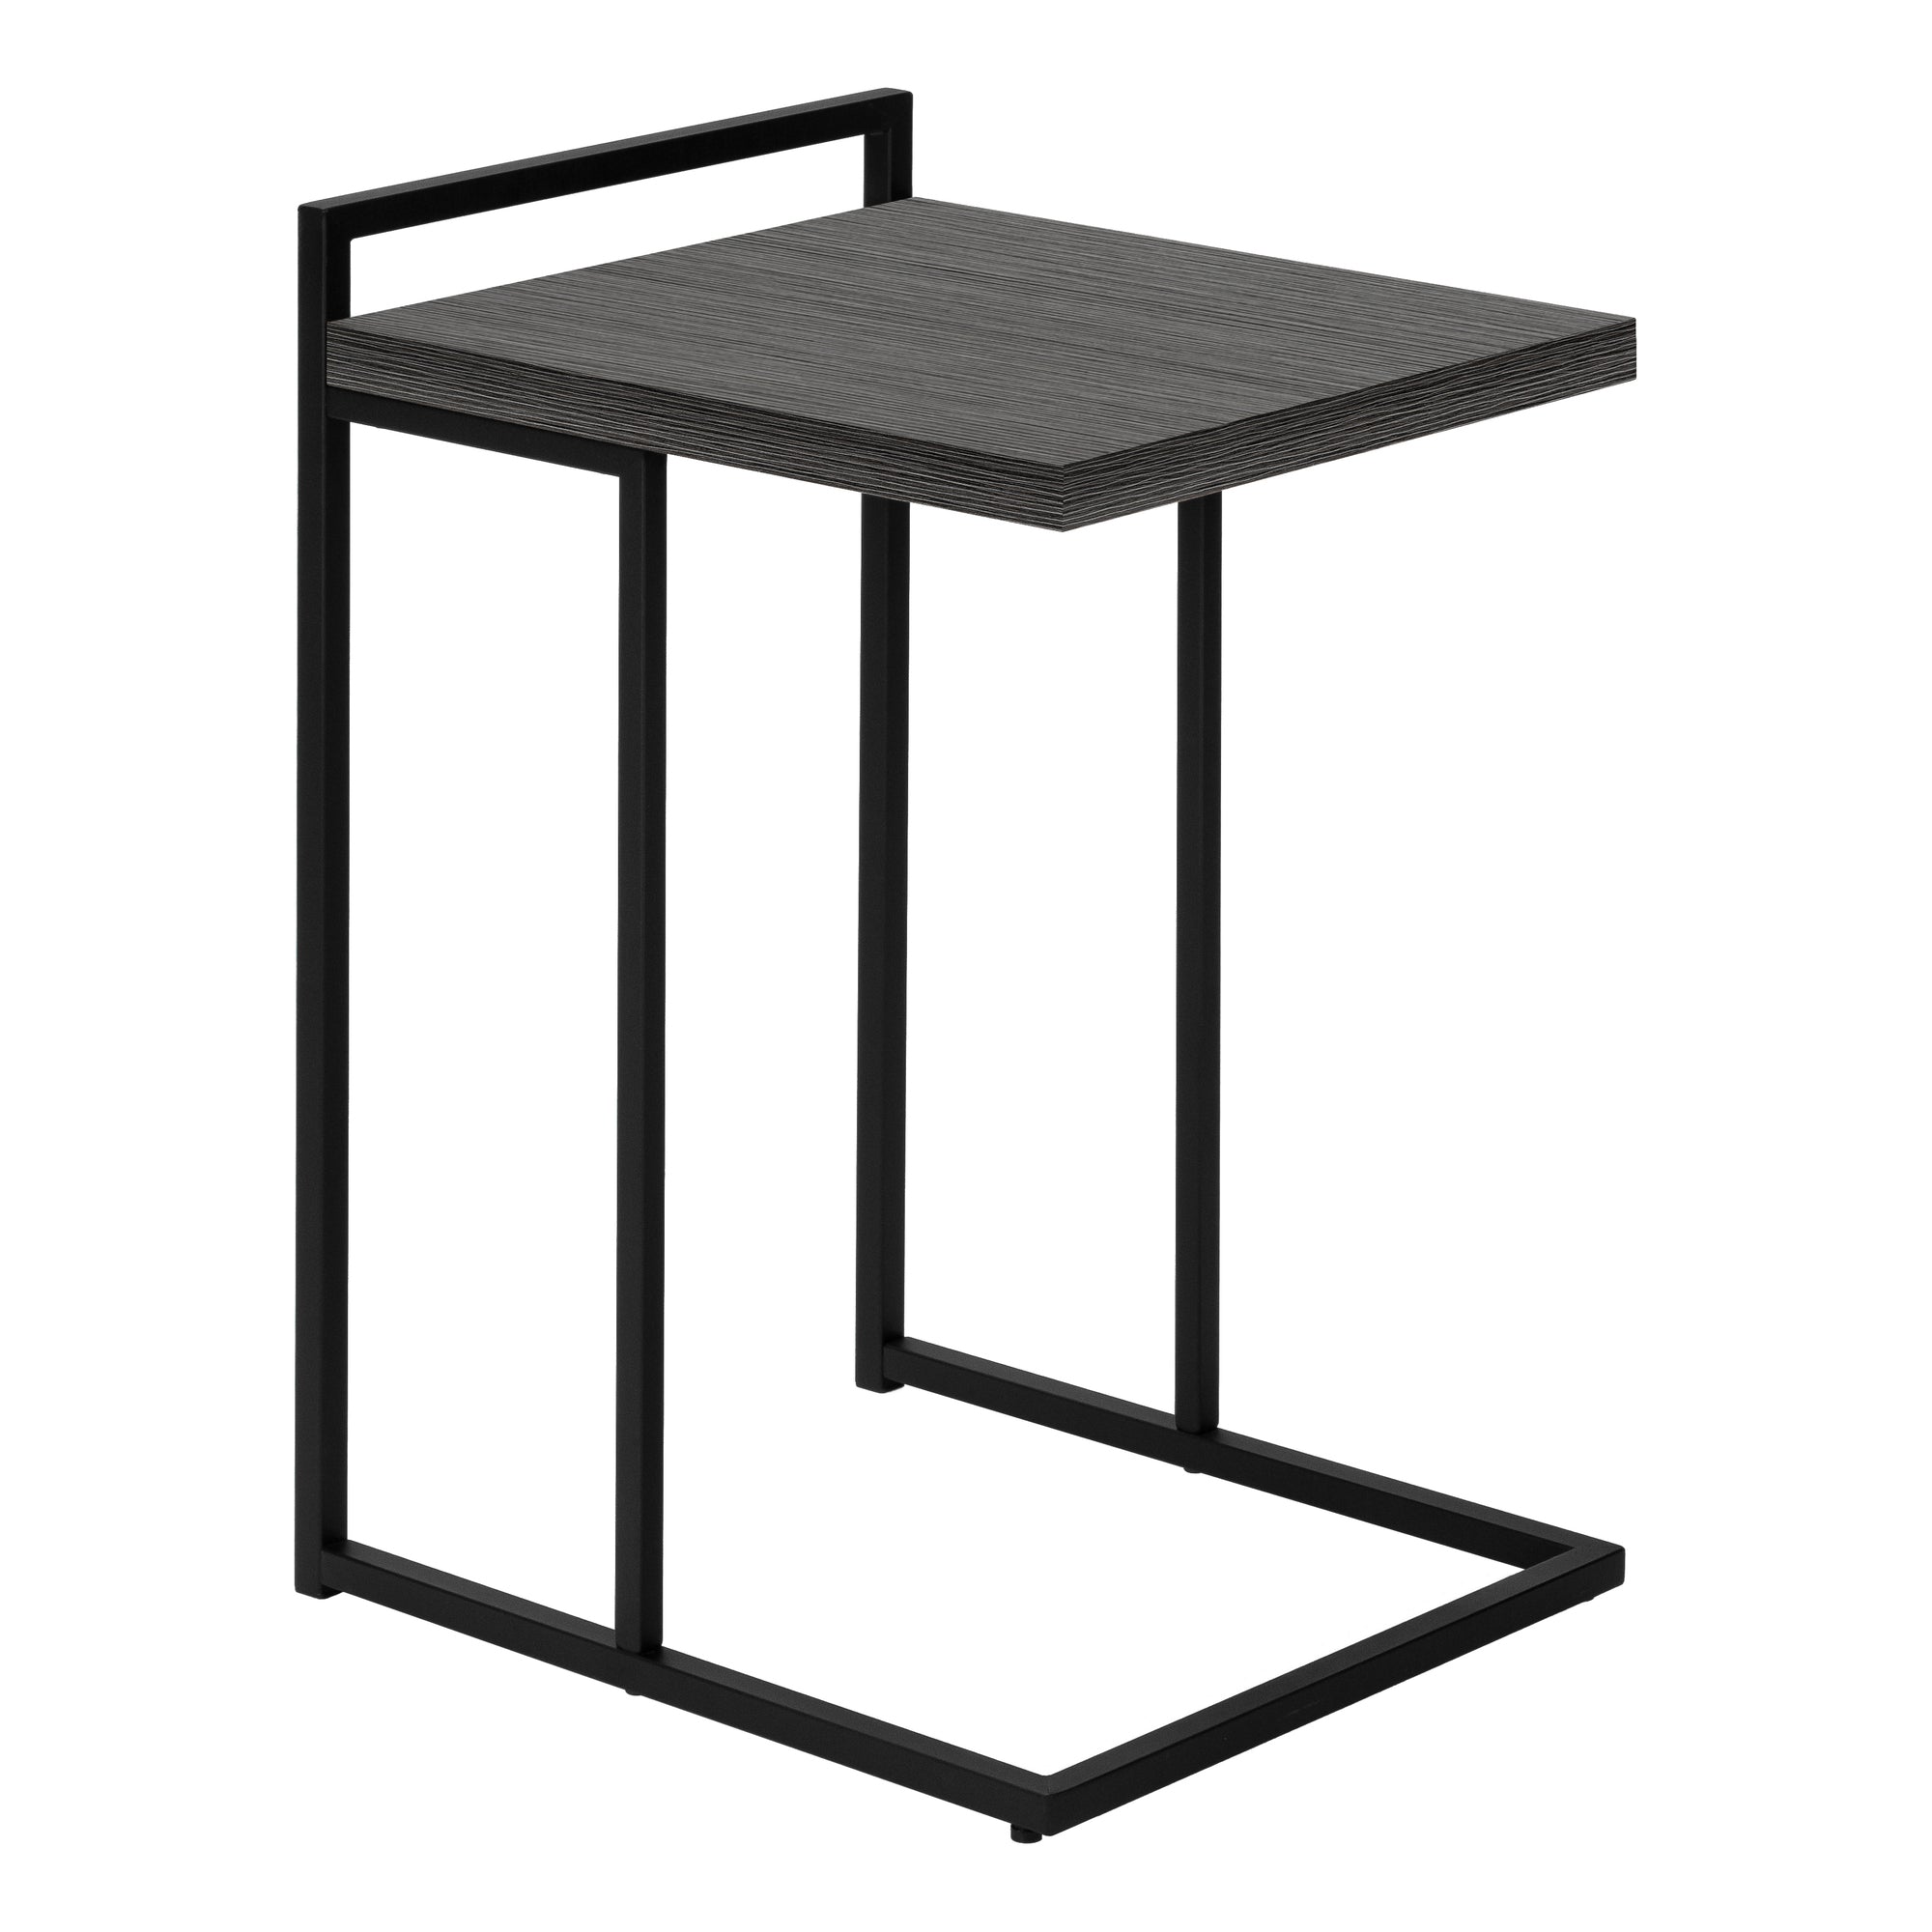 MN-833634    Accent Table, C-Shaped, End, Side, Snack, Living Room, Bedroom, Metal Frame, Laminate, Grey, Black, Contemporary, Modern